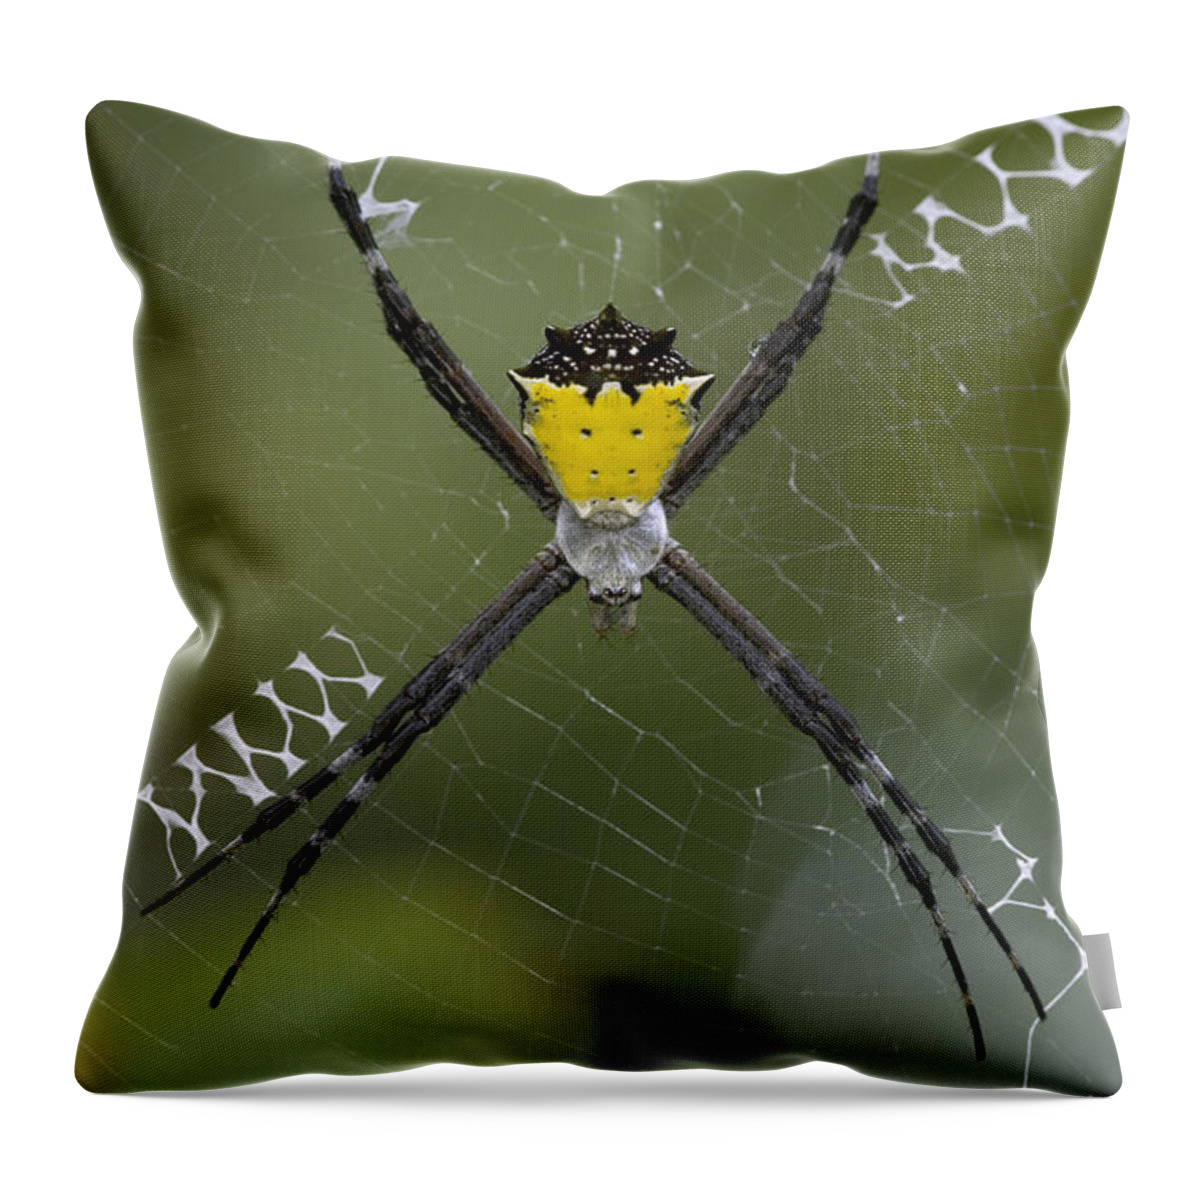 00298202 Throw Pillow featuring the photograph Tiger Spider Female On A Web Costa Rica by Piotr Naskrecki